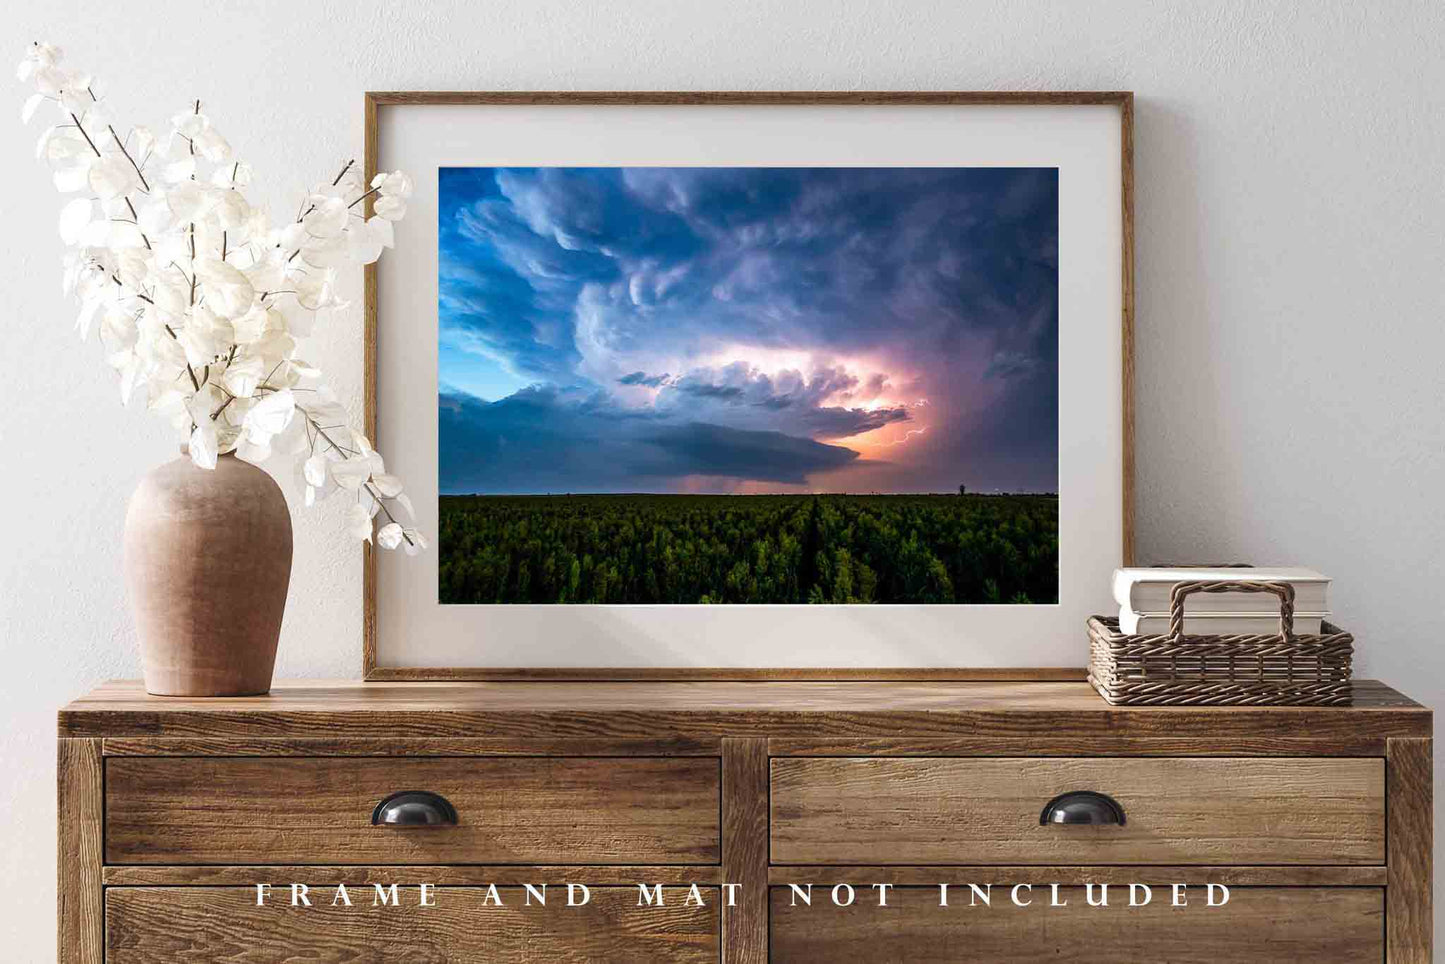 Thunderstorm Photography Print - Picture of Storm Cloud Illuminated by Lightning Over Field at Night in Nebraska Scenic Wall Art Photo Decor